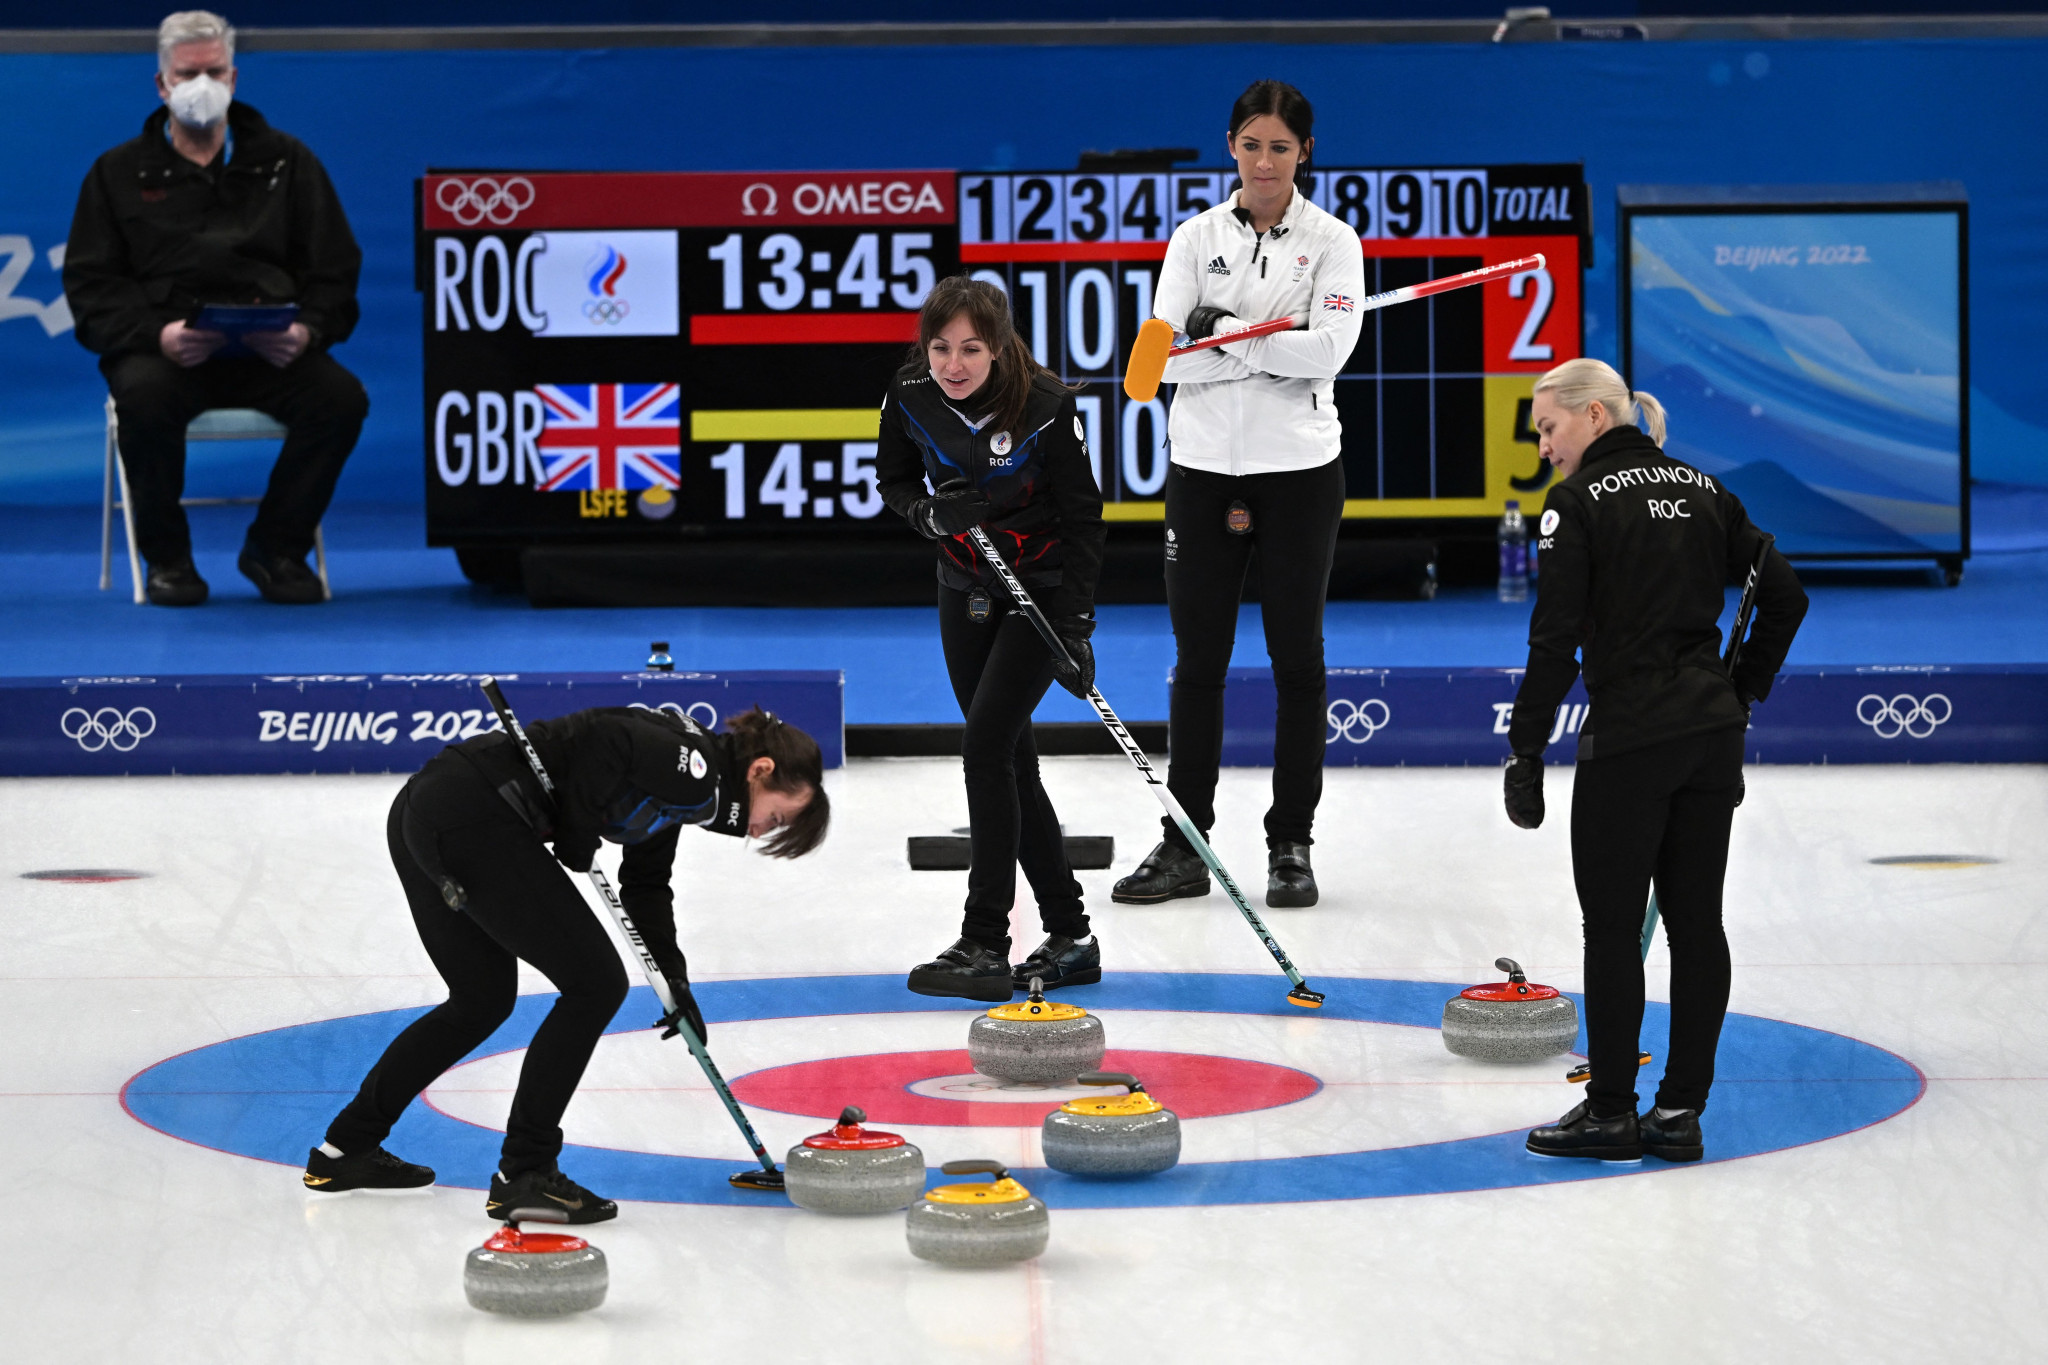 Russian curlers (dark shirts) competed as Russian Olympic Committee at Beijing 2022 but a suspension was imposed after the invasion of Ukraine ©Getty Images